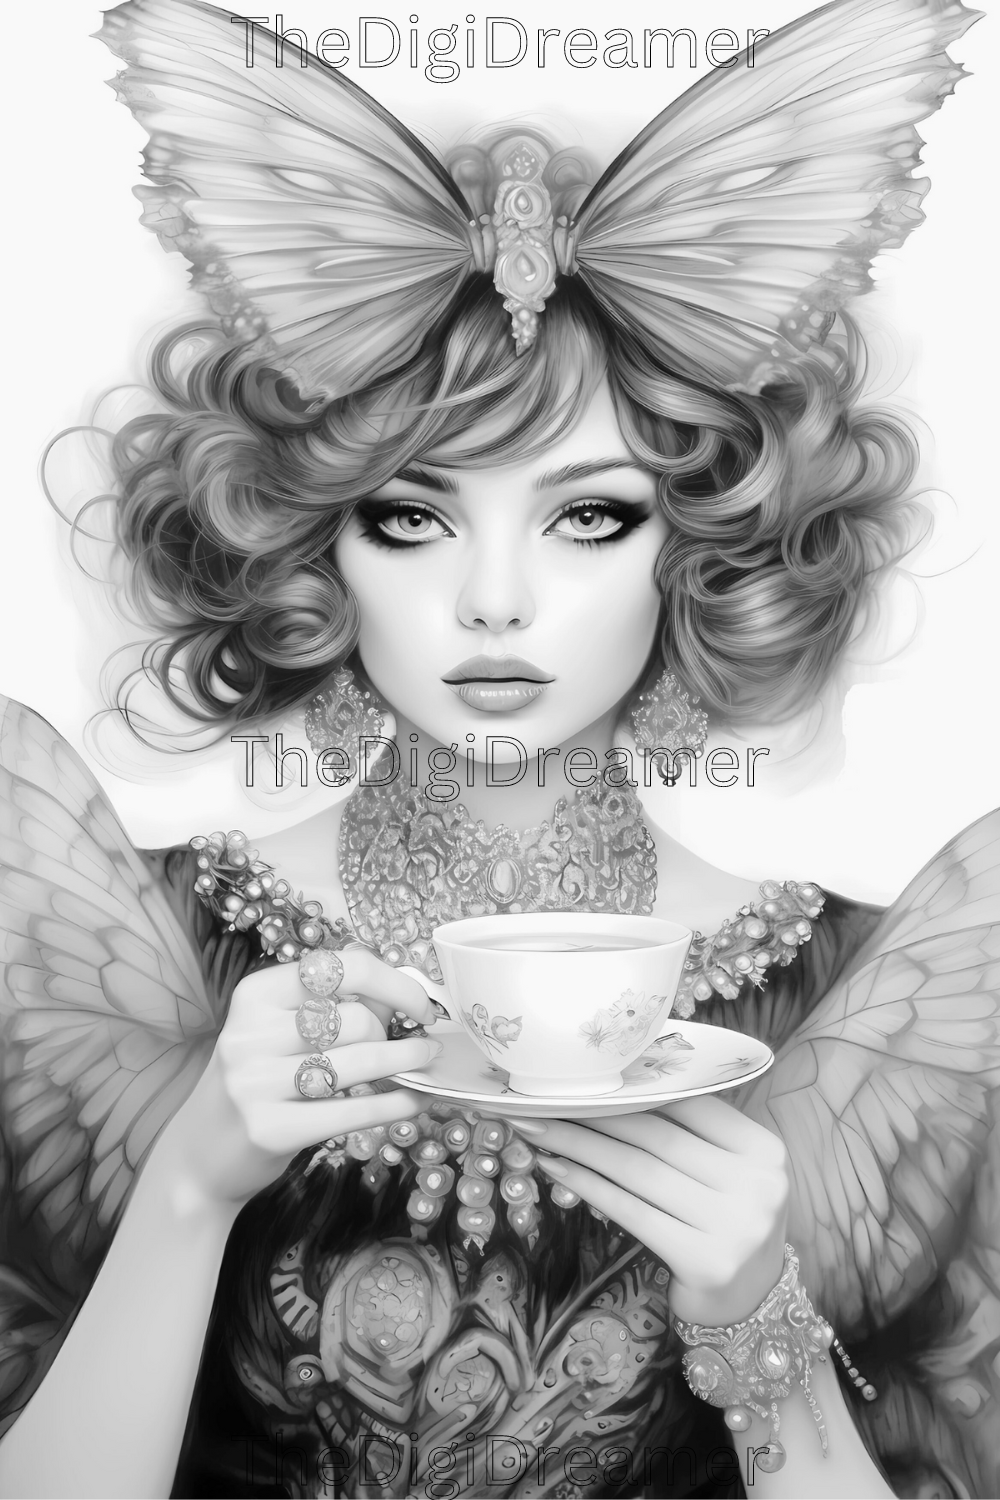 40 Tea Cup Fairies Set 2-Grayscale Printable Coloring Pages For Adults, Digital Download